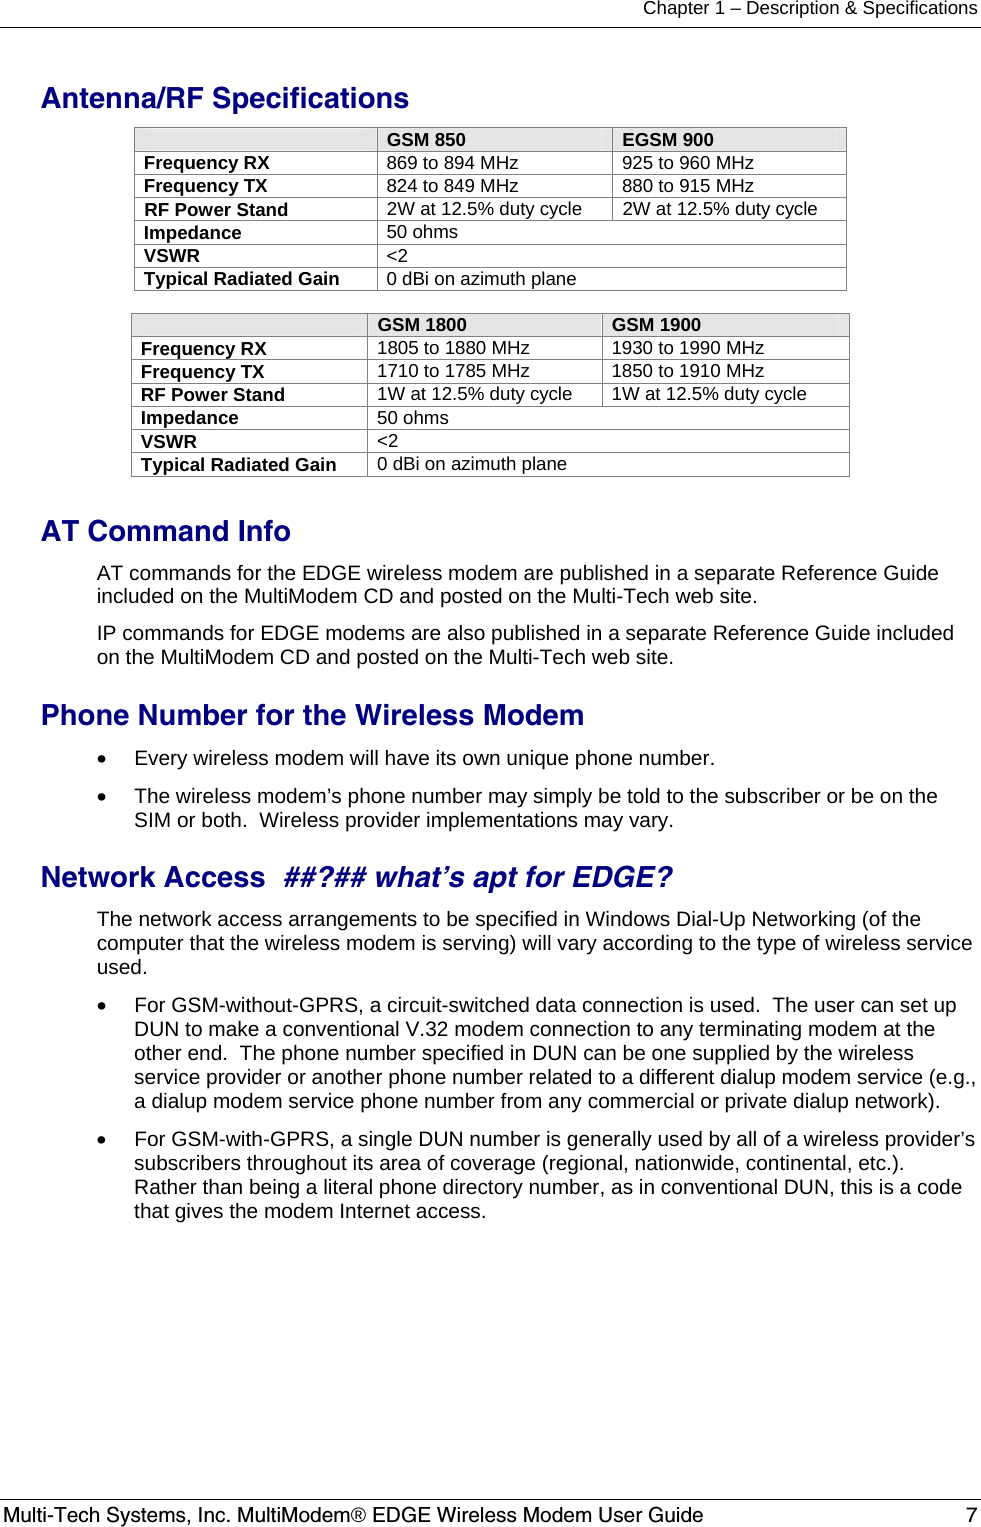 Chapter 1 – Description &amp; Specifications Multi-Tech Systems, Inc. MultiModem® EDGE Wireless Modem User Guide  7  Antenna/RF Specifications  GSM 850  EGSM 900 Frequency RX  869 to 894 MHz  925 to 960 MHz Frequency TX  824 to 849 MHz  880 to 915 MHz RF Power Stand  2W at 12.5% duty cycle  2W at 12.5% duty cycle Impedance  50 ohms VSWR  &lt;2 Typical Radiated Gain  0 dBi on azimuth plane   GSM 1800  GSM 1900 Frequency RX  1805 to 1880 MHz  1930 to 1990 MHz Frequency TX  1710 to 1785 MHz  1850 to 1910 MHz RF Power Stand  1W at 12.5% duty cycle  1W at 12.5% duty cycle Impedance  50 ohms VSWR  &lt;2 Typical Radiated Gain  0 dBi on azimuth plane  AT Command Info AT commands for the EDGE wireless modem are published in a separate Reference Guide included on the MultiModem CD and posted on the Multi-Tech web site. IP commands for EDGE modems are also published in a separate Reference Guide included on the MultiModem CD and posted on the Multi-Tech web site. Phone Number for the Wireless Modem  •  Every wireless modem will have its own unique phone number. •  The wireless modem’s phone number may simply be told to the subscriber or be on the SIM or both.  Wireless provider implementations may vary. Network Access  ##?## what’s apt for EDGE? The network access arrangements to be specified in Windows Dial-Up Networking (of the computer that the wireless modem is serving) will vary according to the type of wireless service used. •  For GSM-without-GPRS, a circuit-switched data connection is used.  The user can set up DUN to make a conventional V.32 modem connection to any terminating modem at the other end.  The phone number specified in DUN can be one supplied by the wireless service provider or another phone number related to a different dialup modem service (e.g., a dialup modem service phone number from any commercial or private dialup network). •  For GSM-with-GPRS, a single DUN number is generally used by all of a wireless provider’s subscribers throughout its area of coverage (regional, nationwide, continental, etc.).  Rather than being a literal phone directory number, as in conventional DUN, this is a code that gives the modem Internet access.  